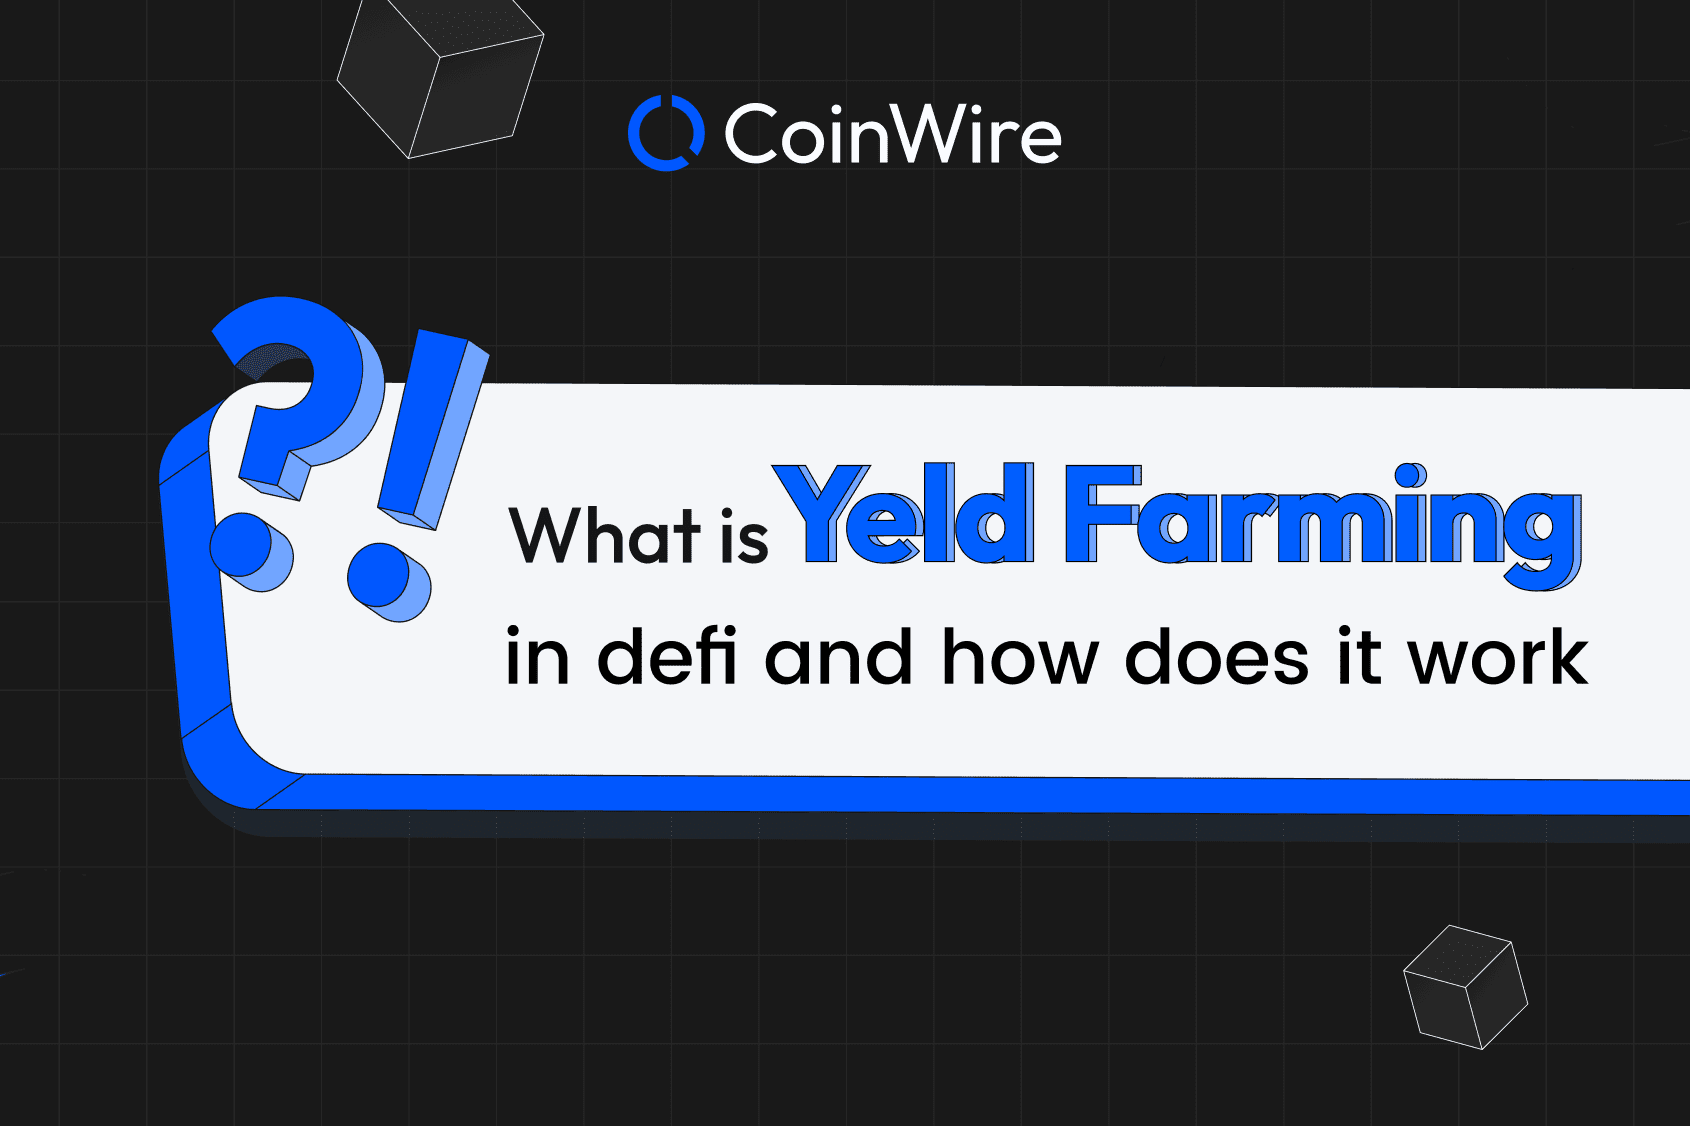 What Is Yield Farming